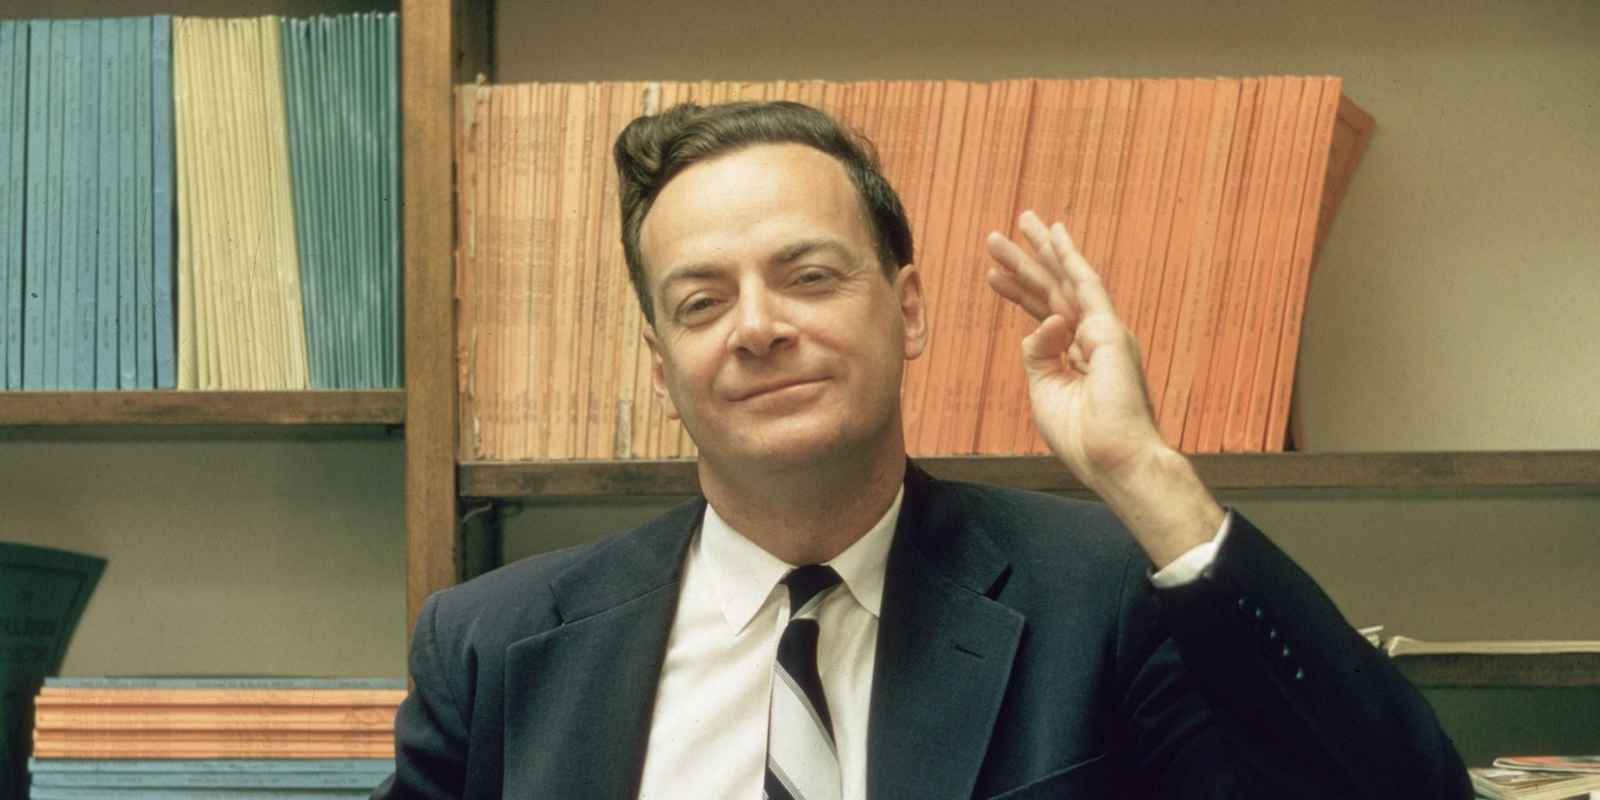 1959:  American physicist Richard Feynman (1918 - 1988) stands and raises one hand, in front of some shelves at Cal Tech University, Sacramento, California.  (Photo by Joe Munroe/Hulton Archive/Getty Images)